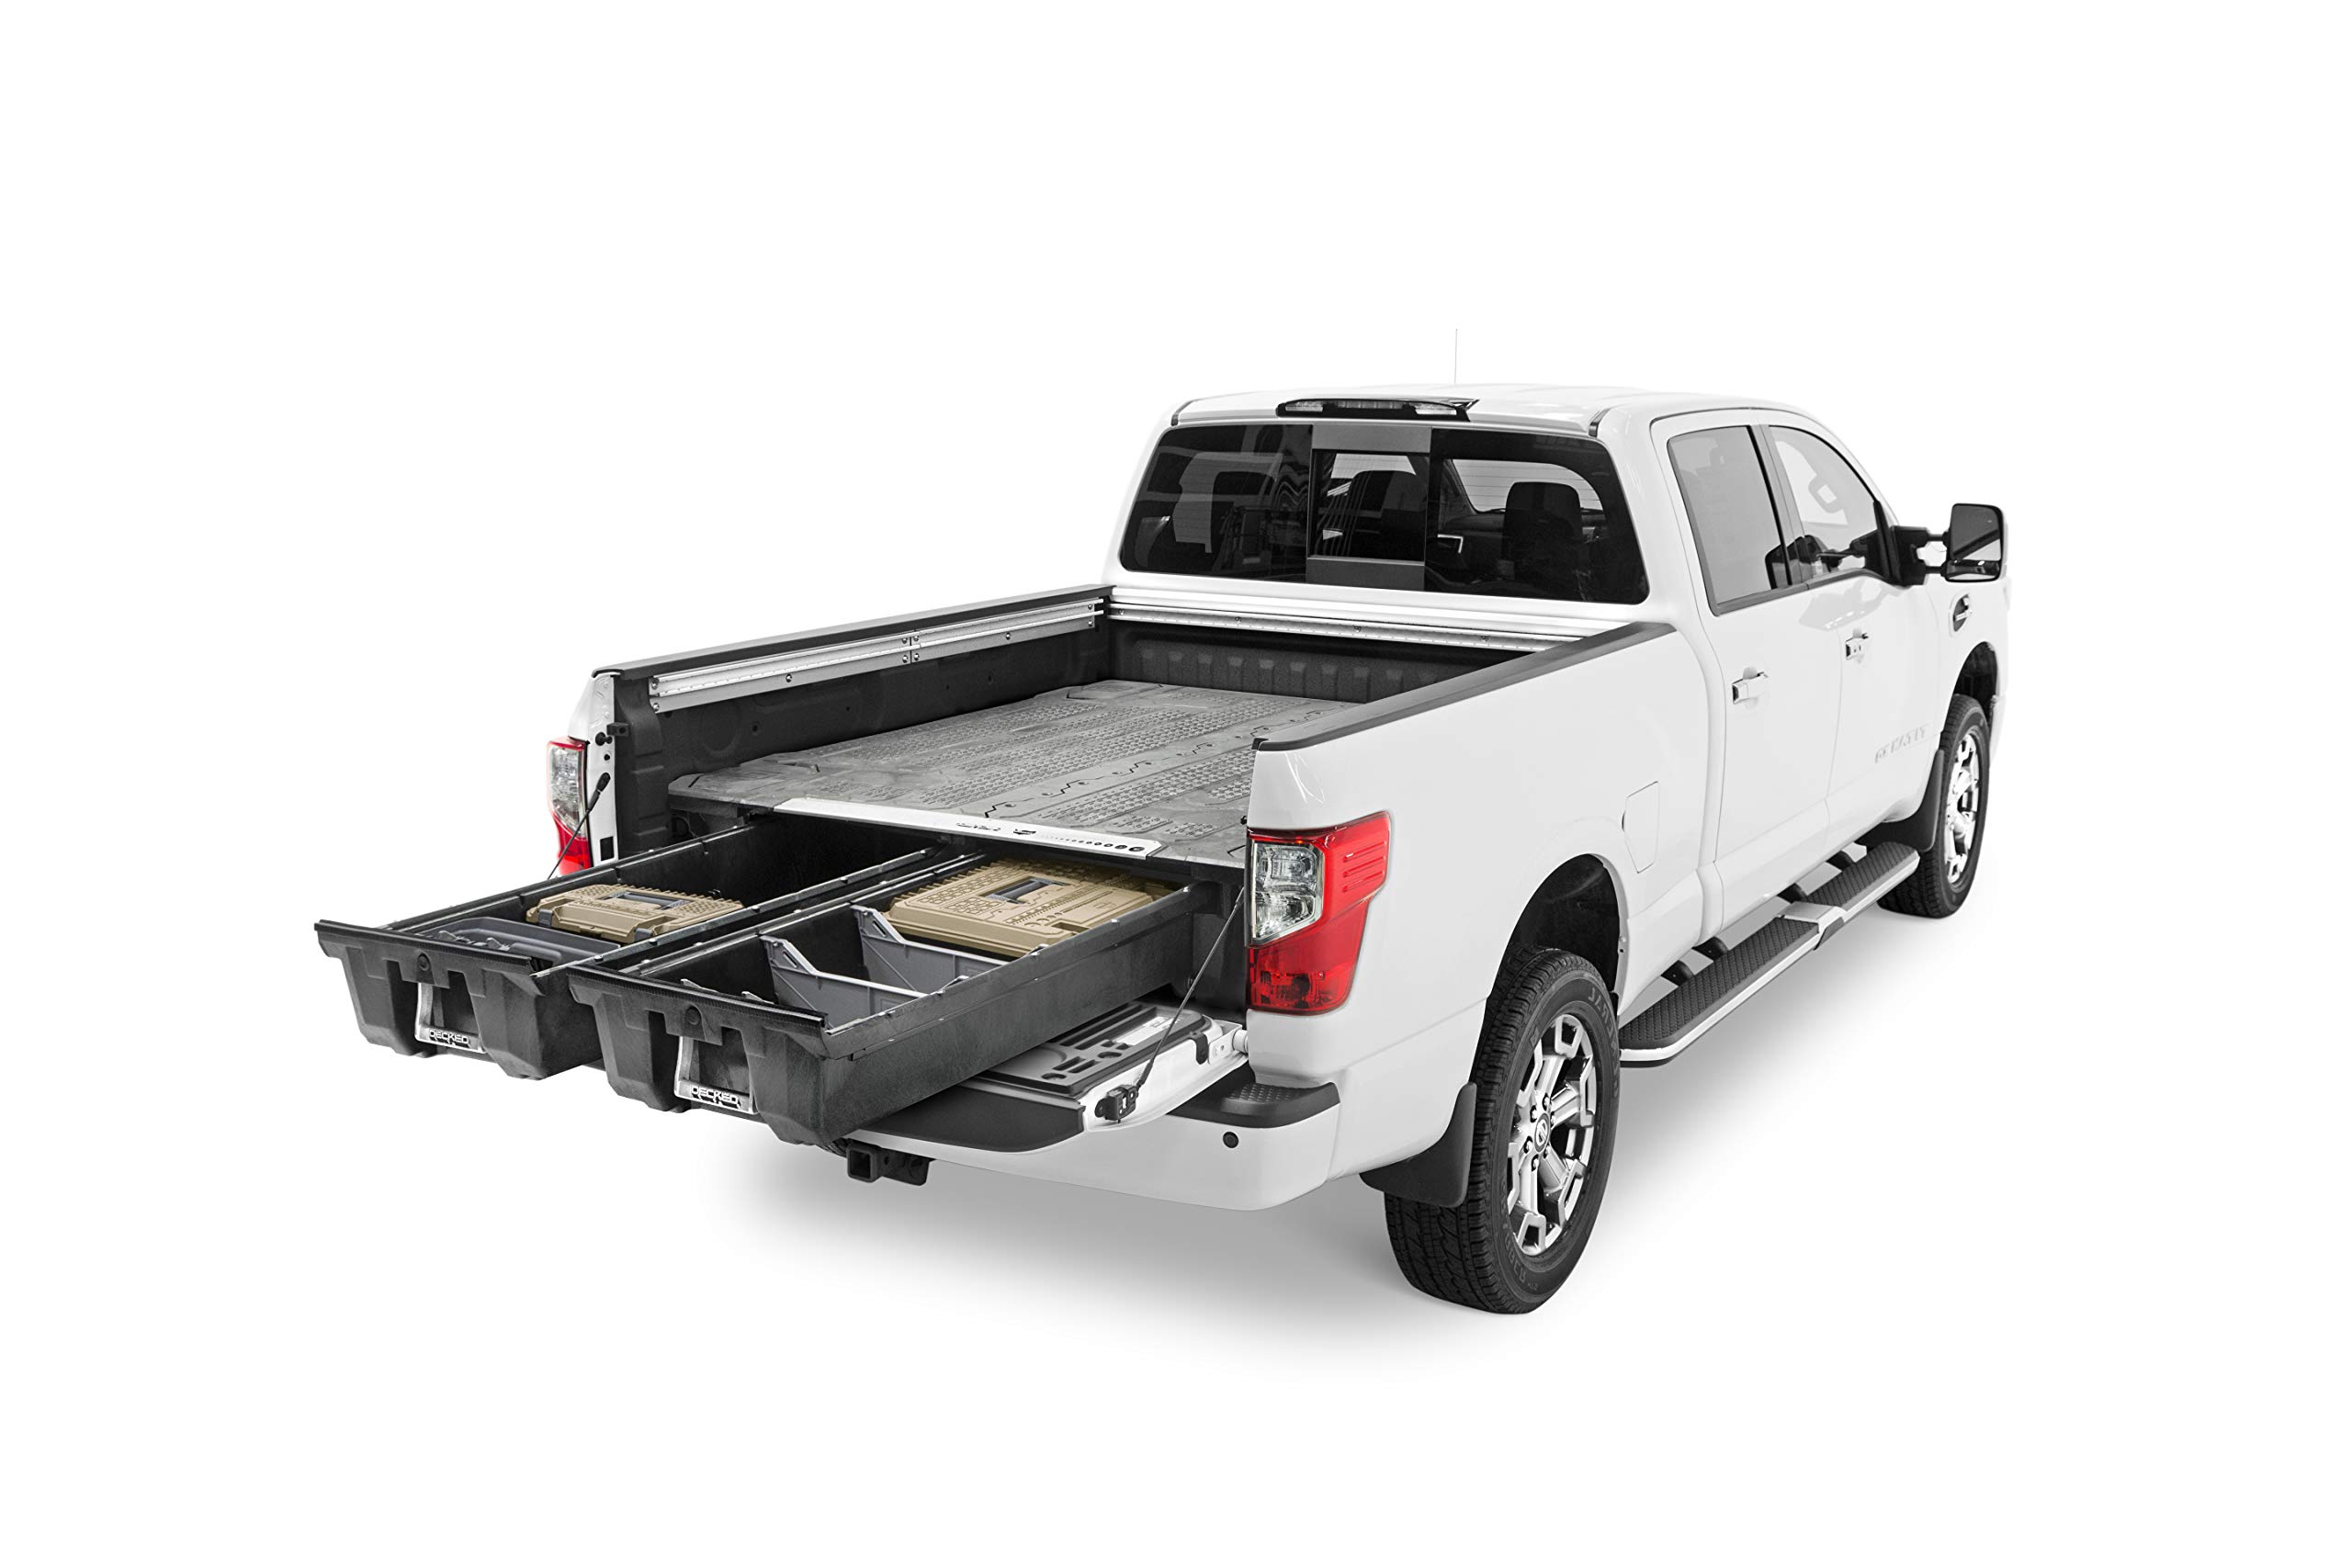 DECKED Pickup Truck Storage System for Nissan Titan (2004-2015) 5' 7" bed  length Includes System Accessories